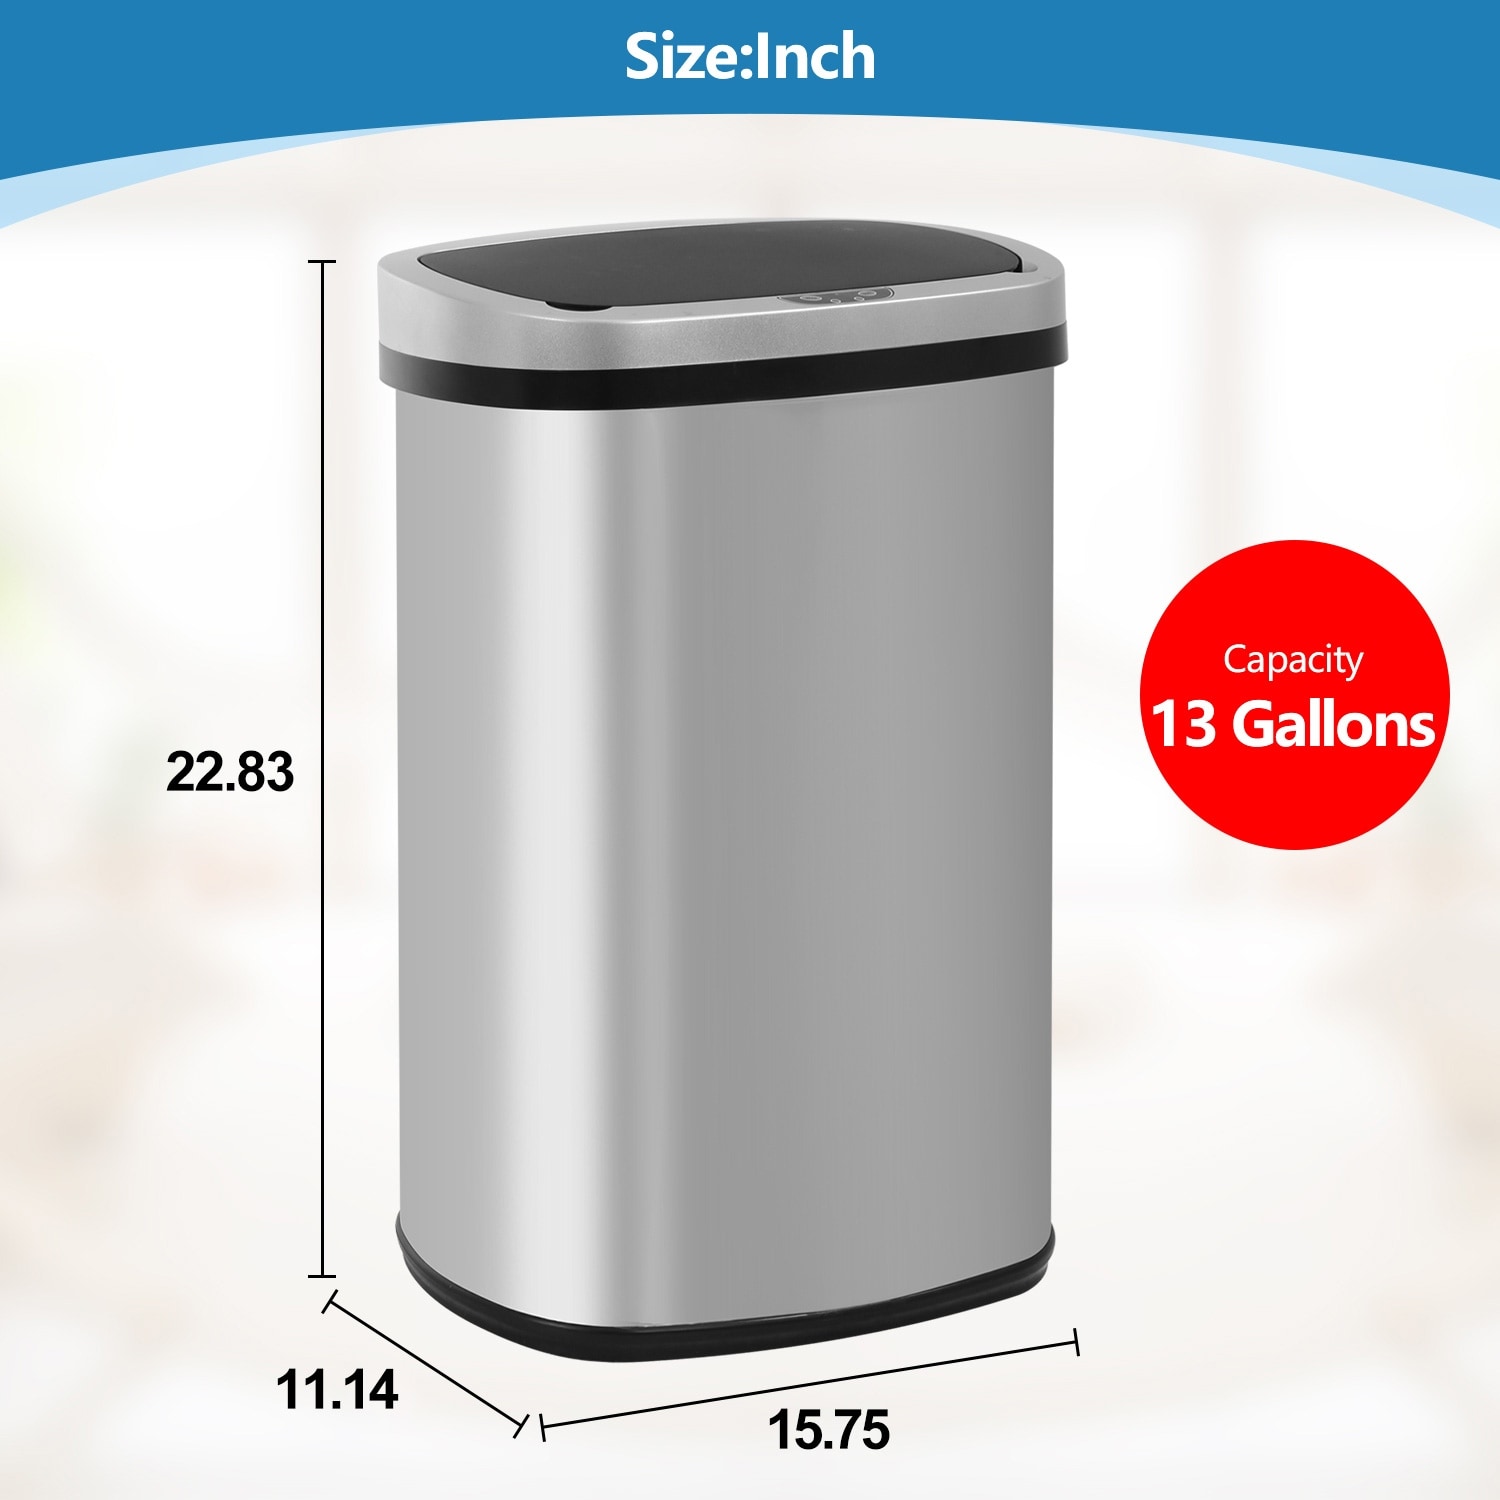 https://ak1.ostkcdn.com/images/products/is/images/direct/fb7e06fa1027d748ff049de75a0a2b7cc561f295/Motion-Sensor-13-Gallon-50-Liter-Stainless-Steel-Odorless-Slim-Trash-Can-by-Furniture-of-America.jpg